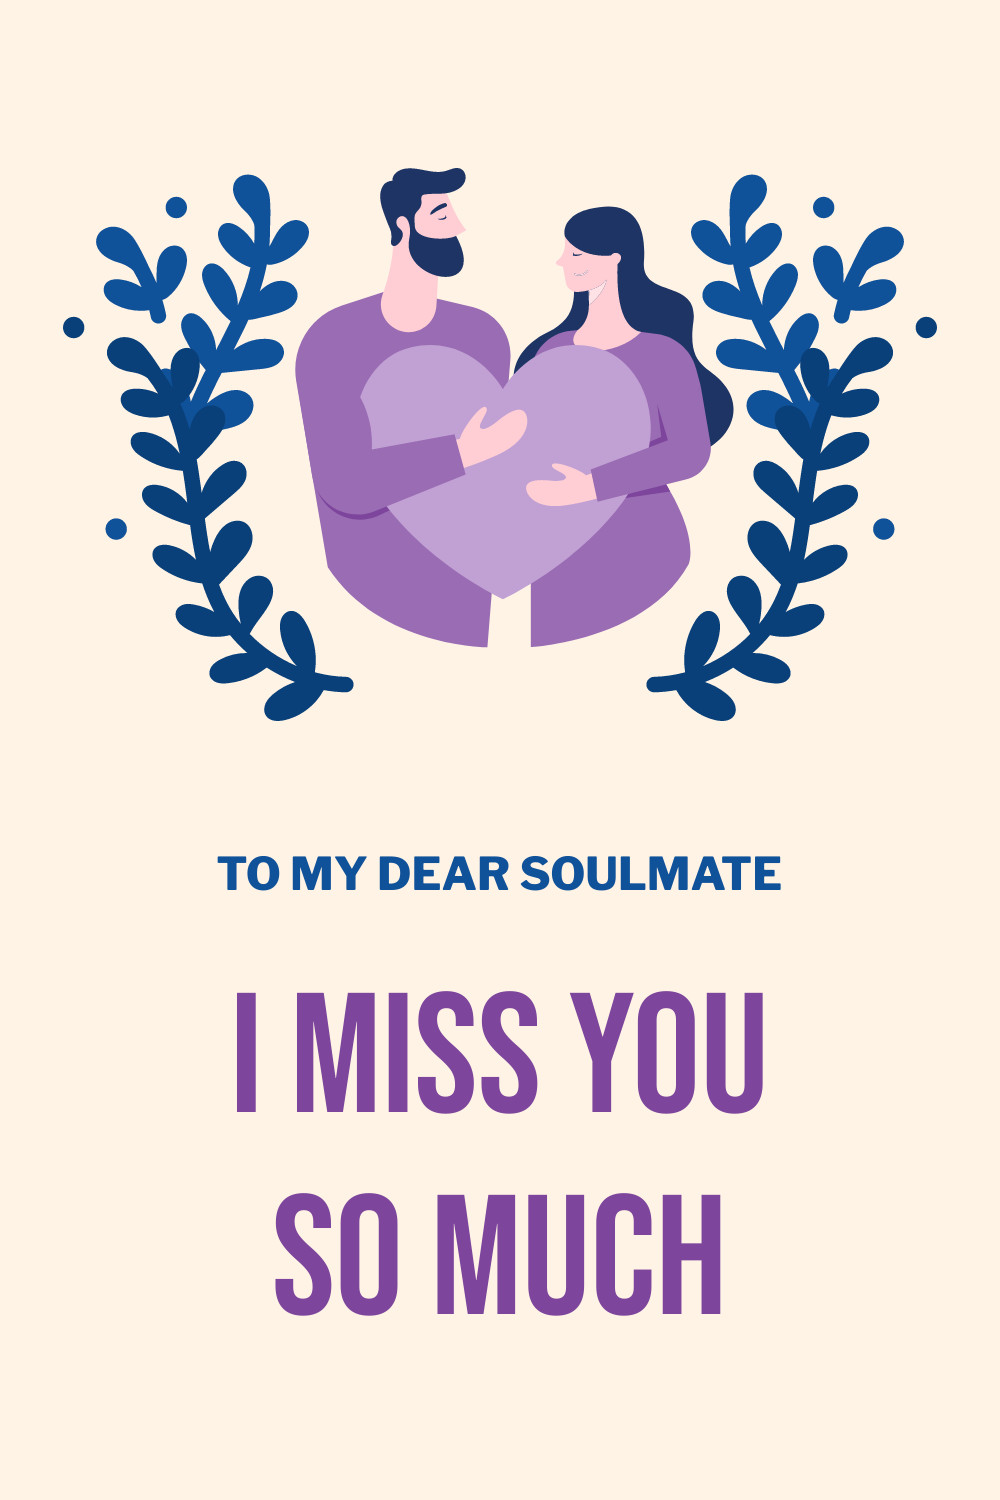 Soulmate Miss Valentine's Day Facebook Cover 820x360